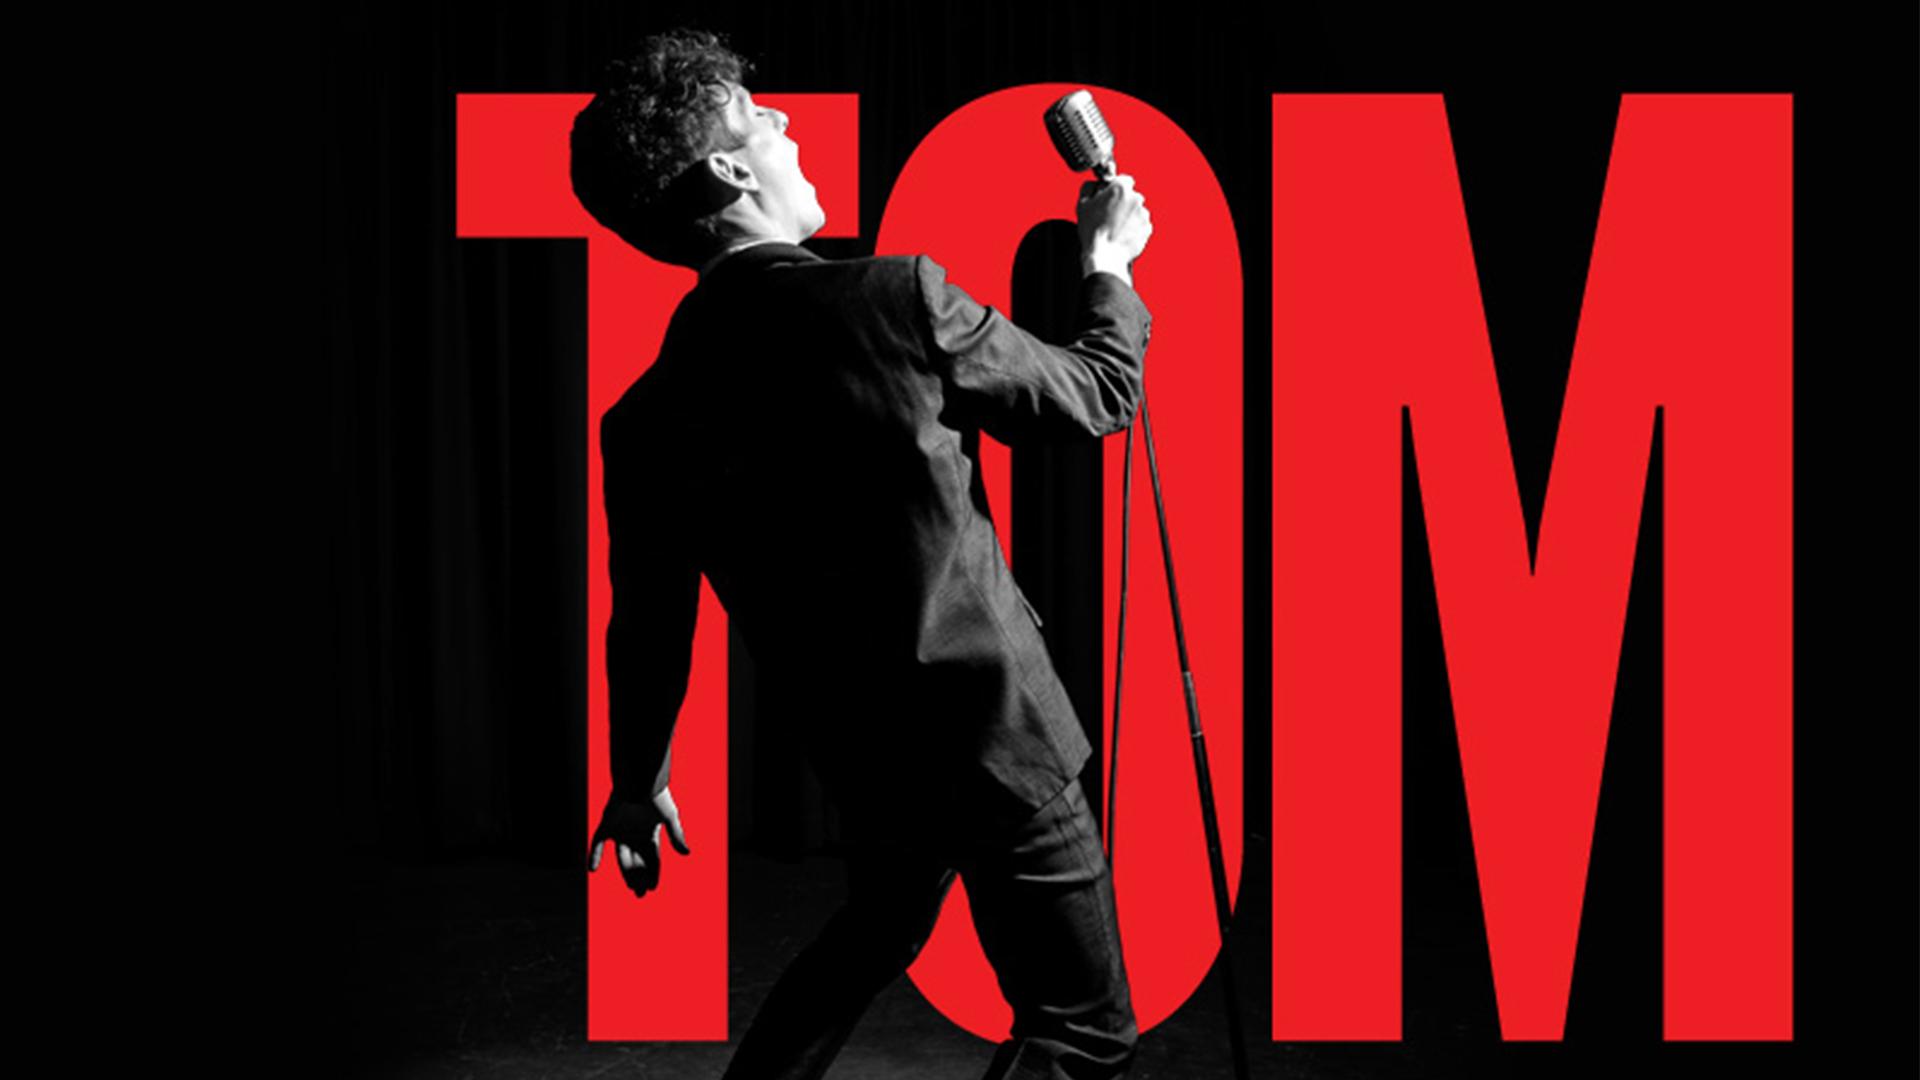 A man holding a microphone on a stand with his back to us with the word TOM in large letters